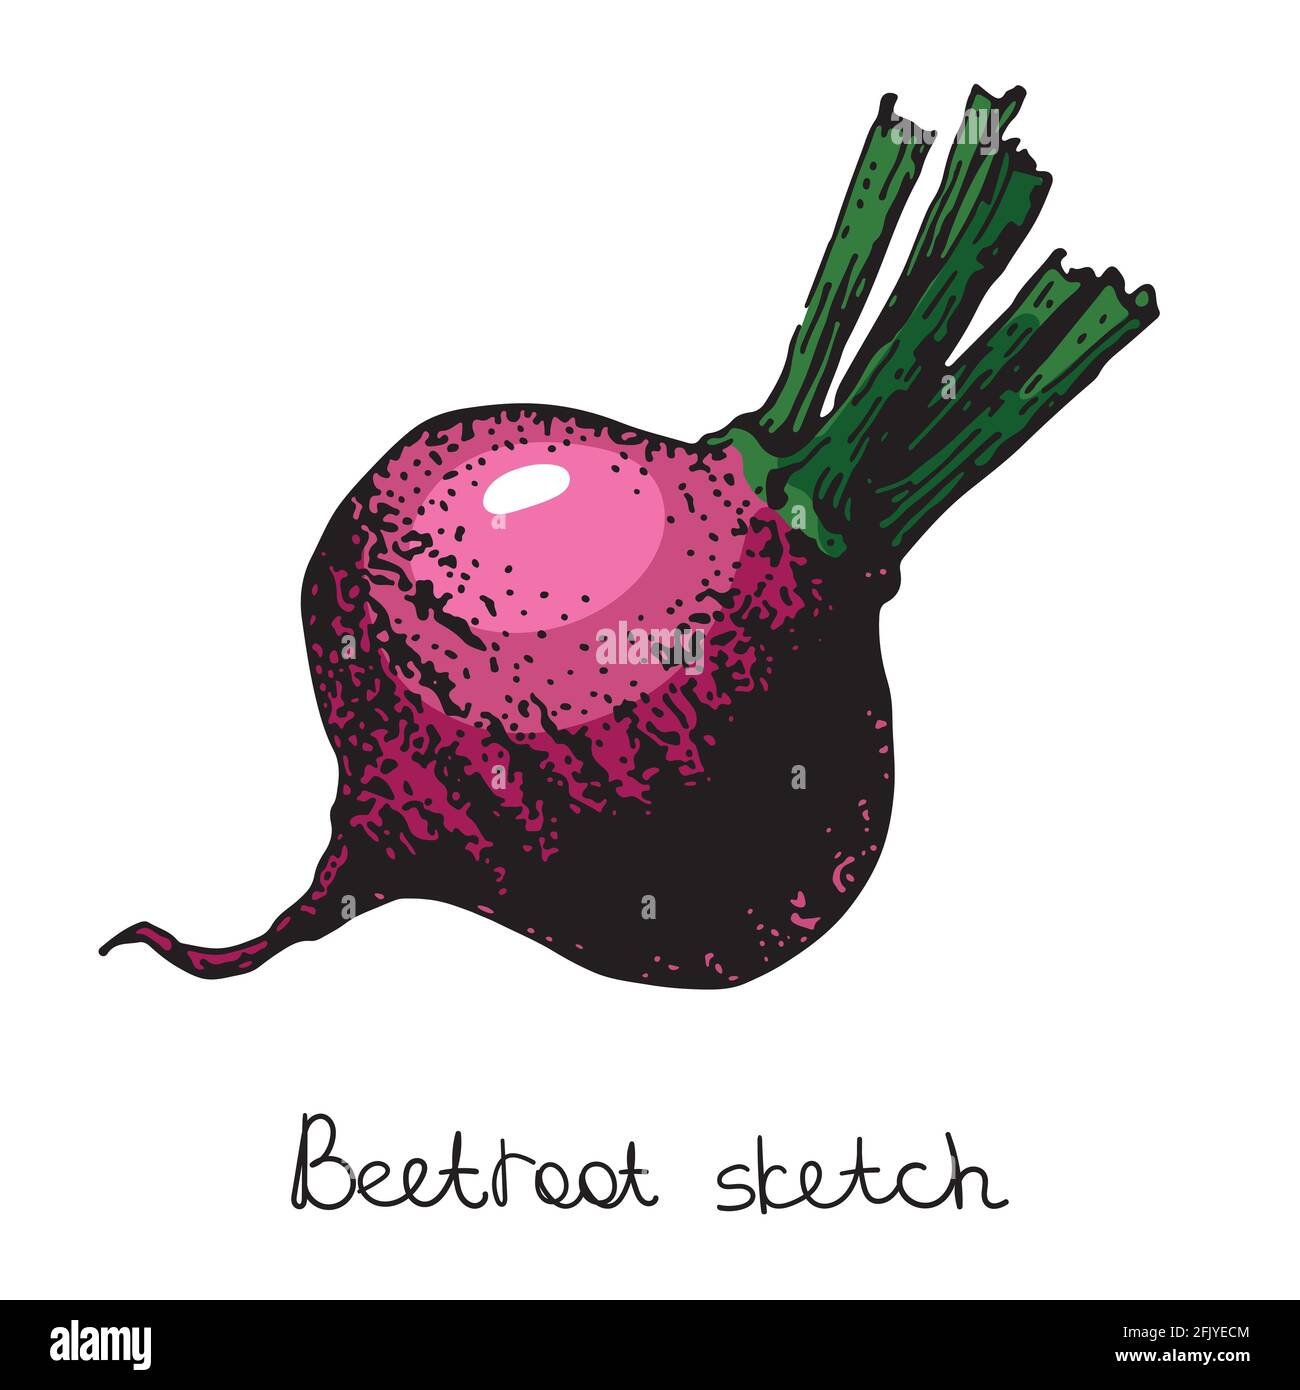 beetroot sketch, color vector illustration. isolated on a white background. Stock Vector